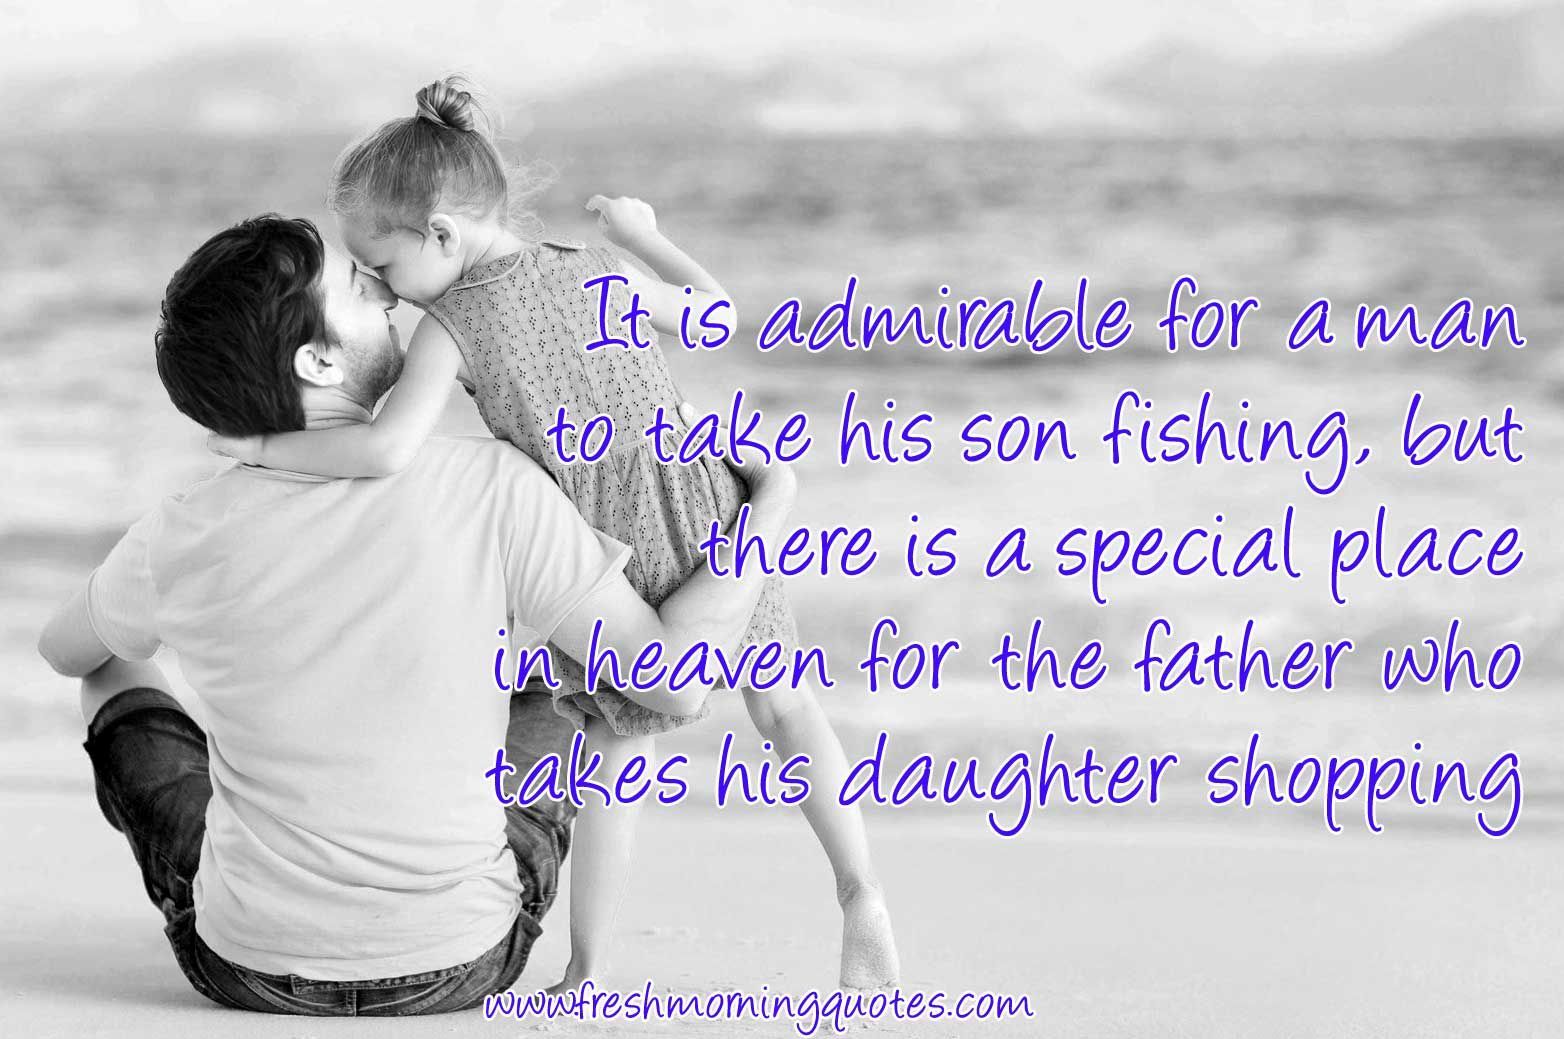 Father And Daughter Quotes Wallpapers - Wallpaper Cave